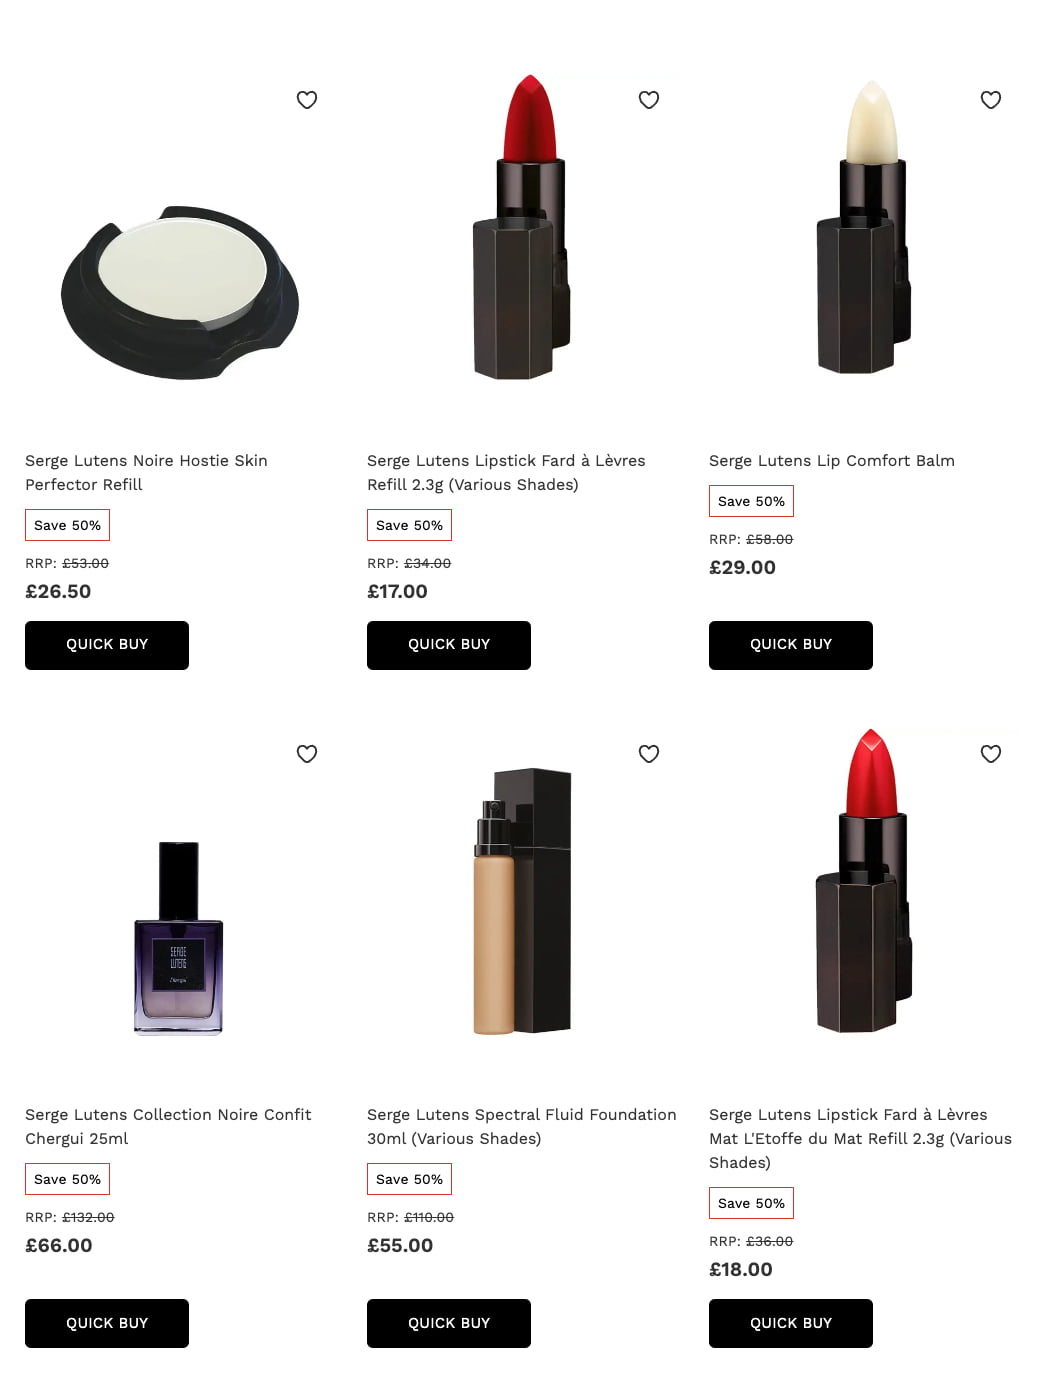 Up to 50% off Serge Lutens at Lookfantastic